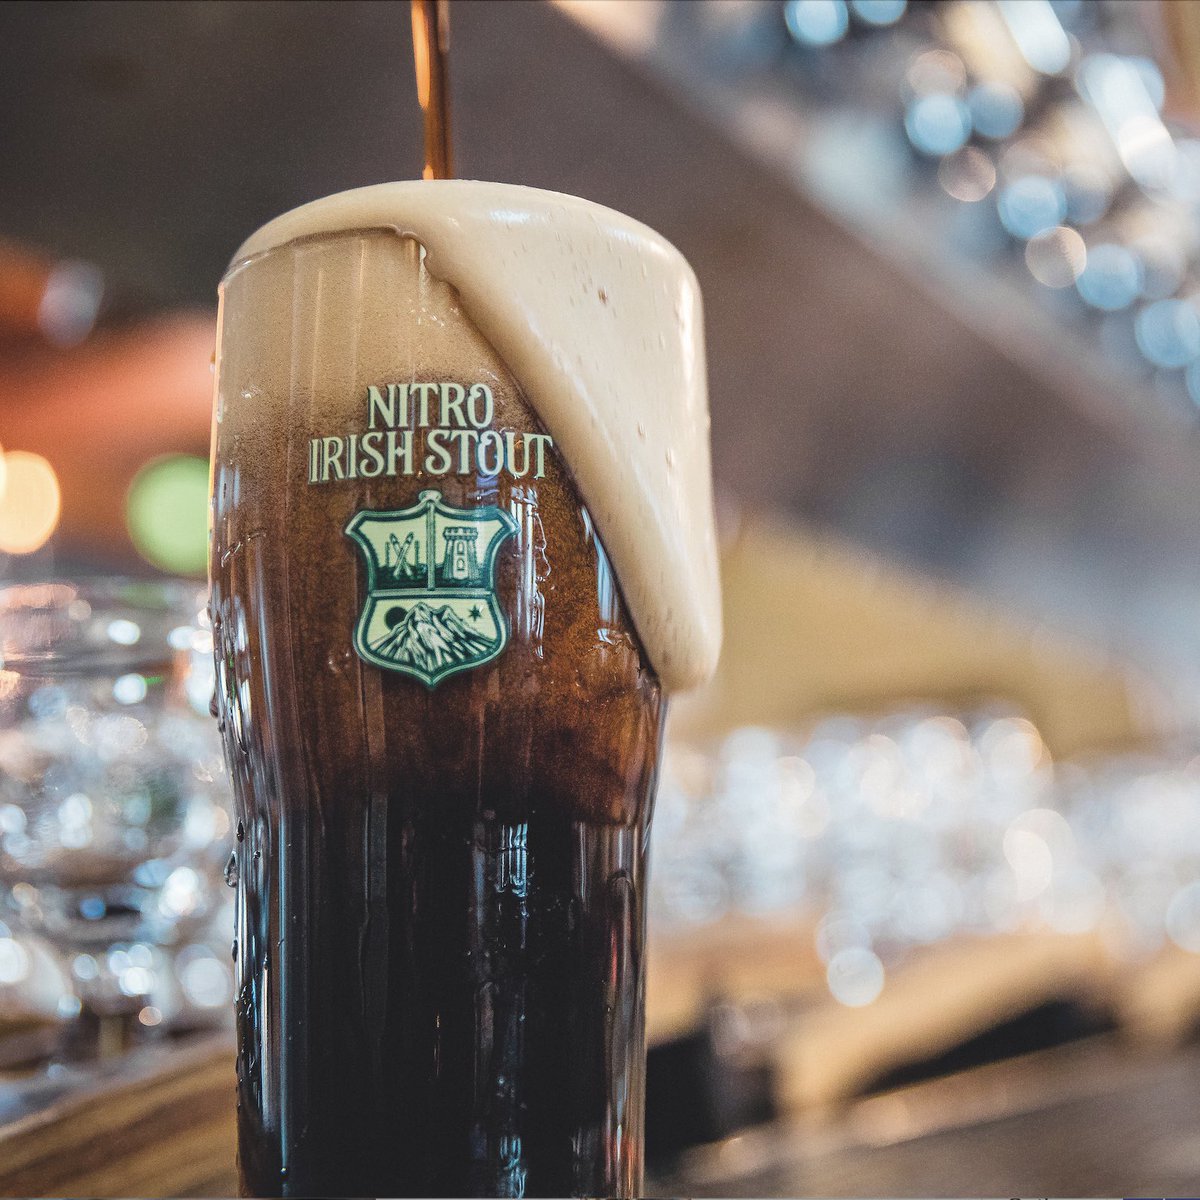 The first of March calls for a pint (or two) of our Nitro Irish Stout ☘️🍺